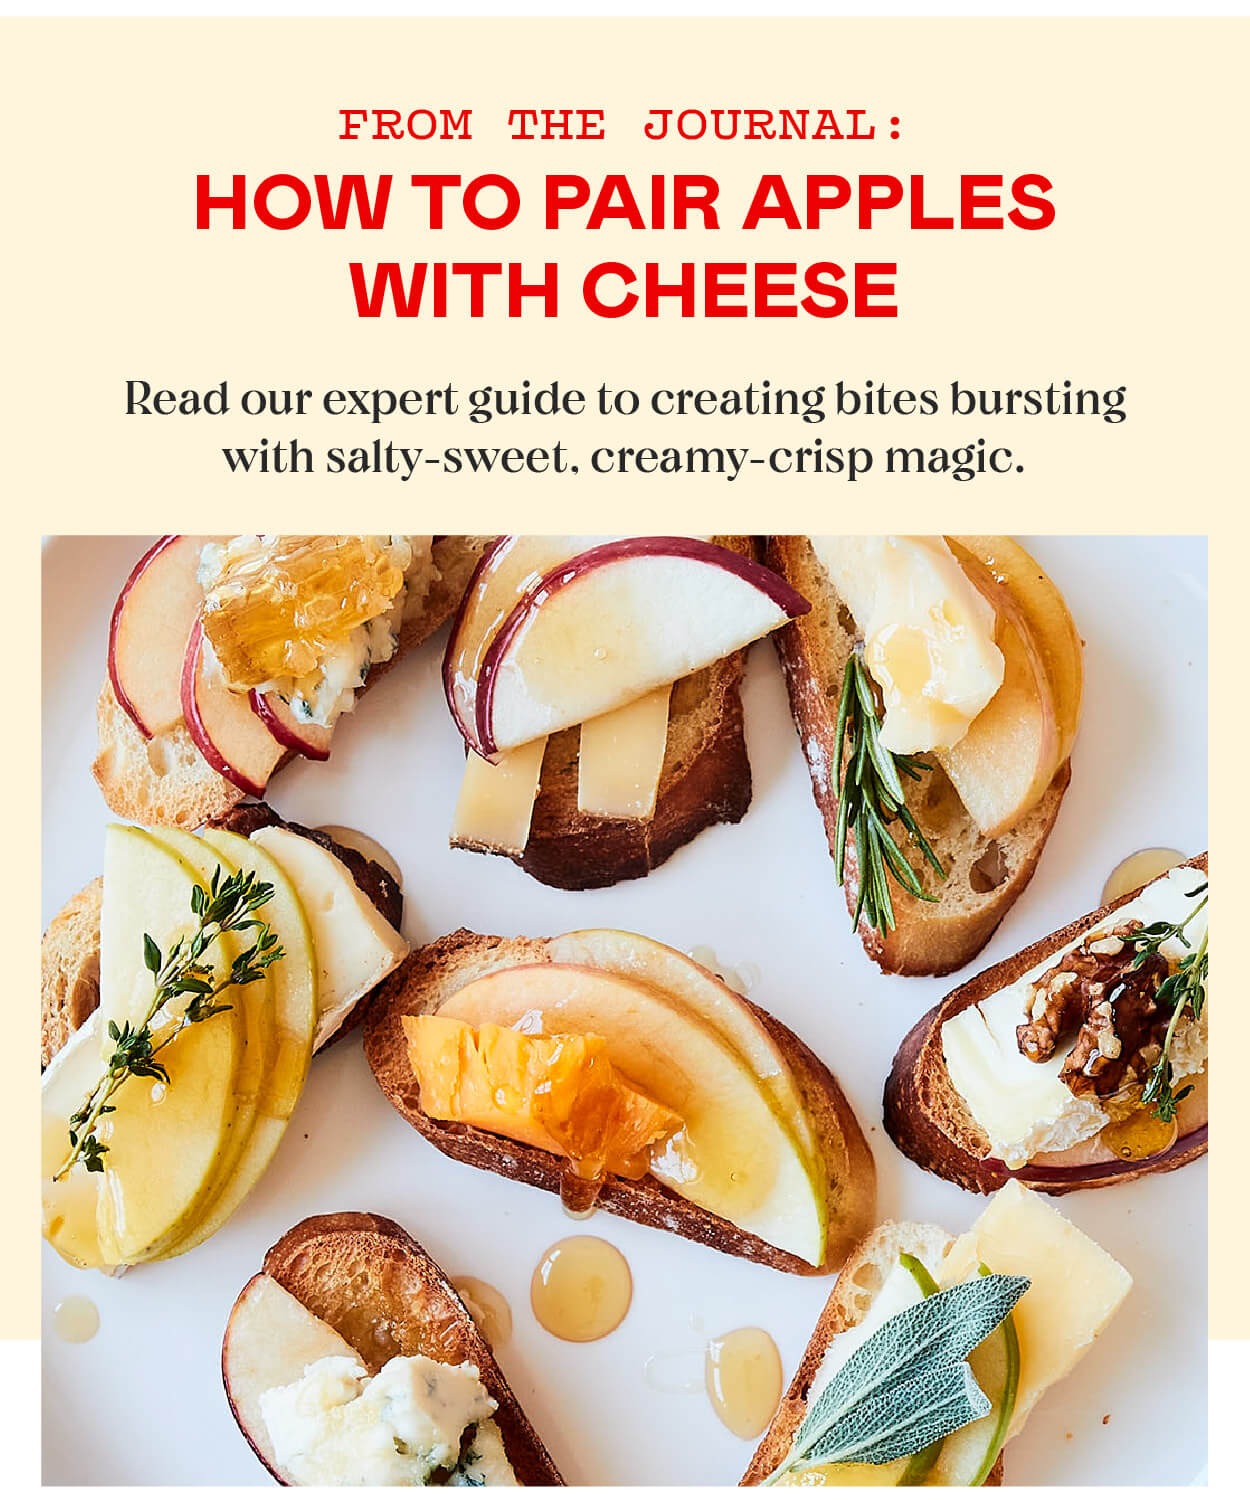 How to Pair Apples With Cheese